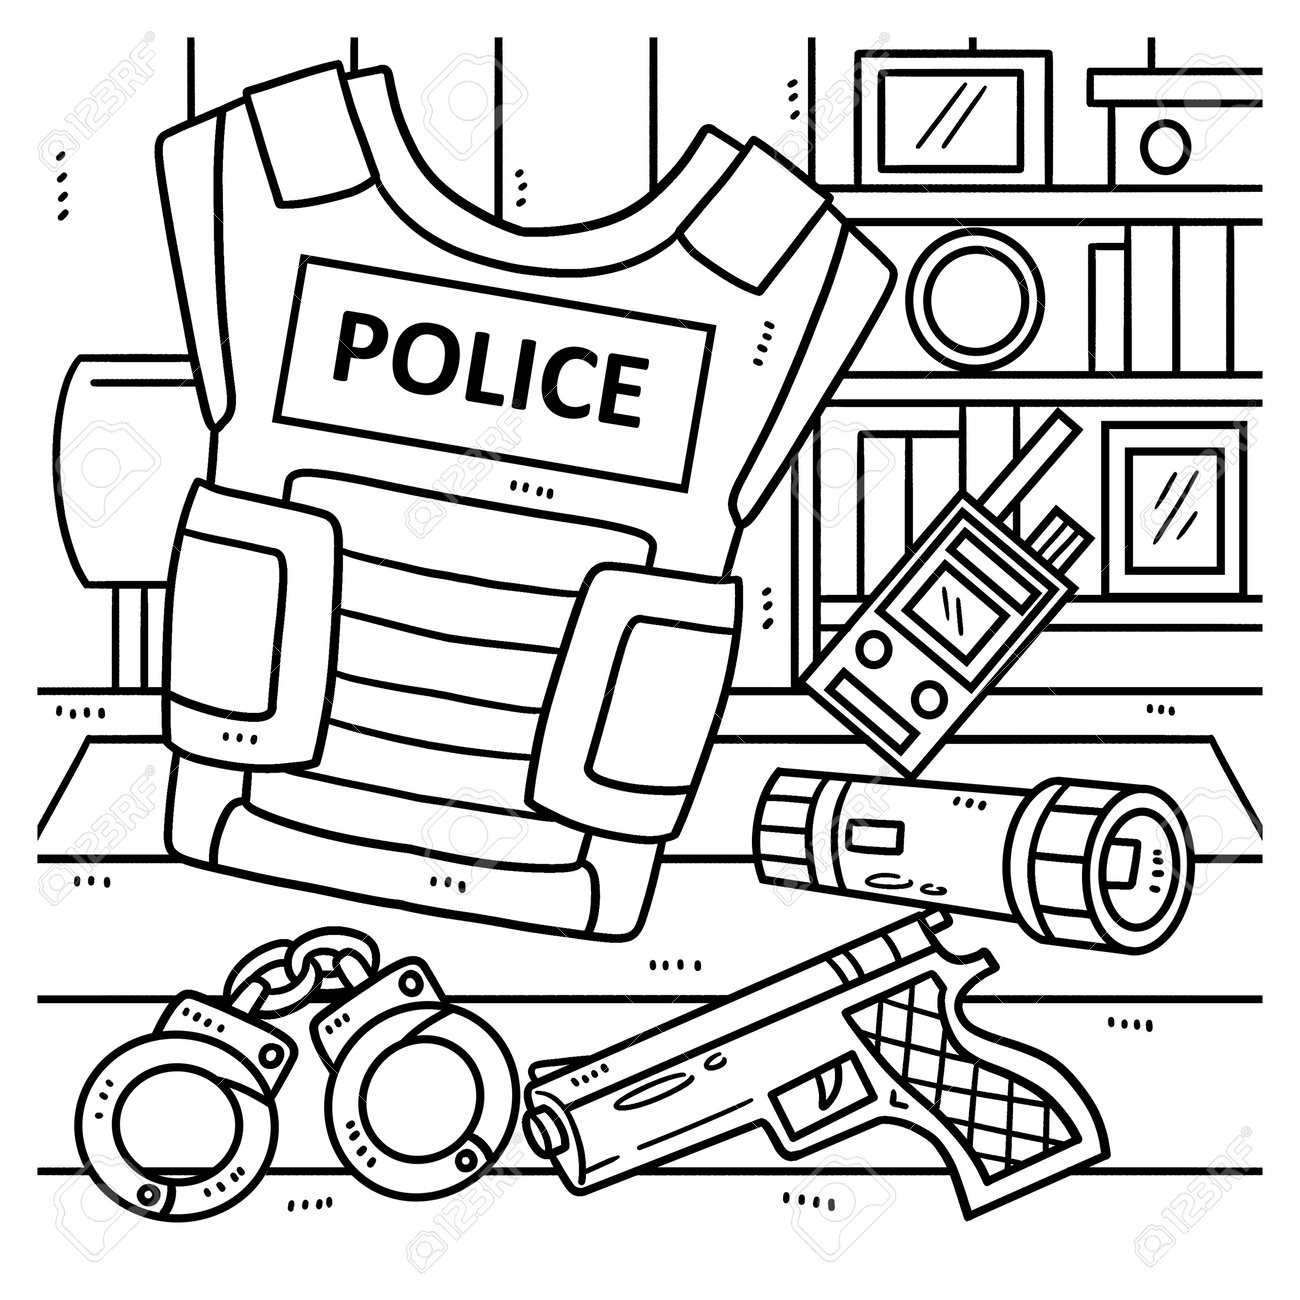 Police officer equipment coloring page for kids royalty free svg cliparts vectors and stock illustration image